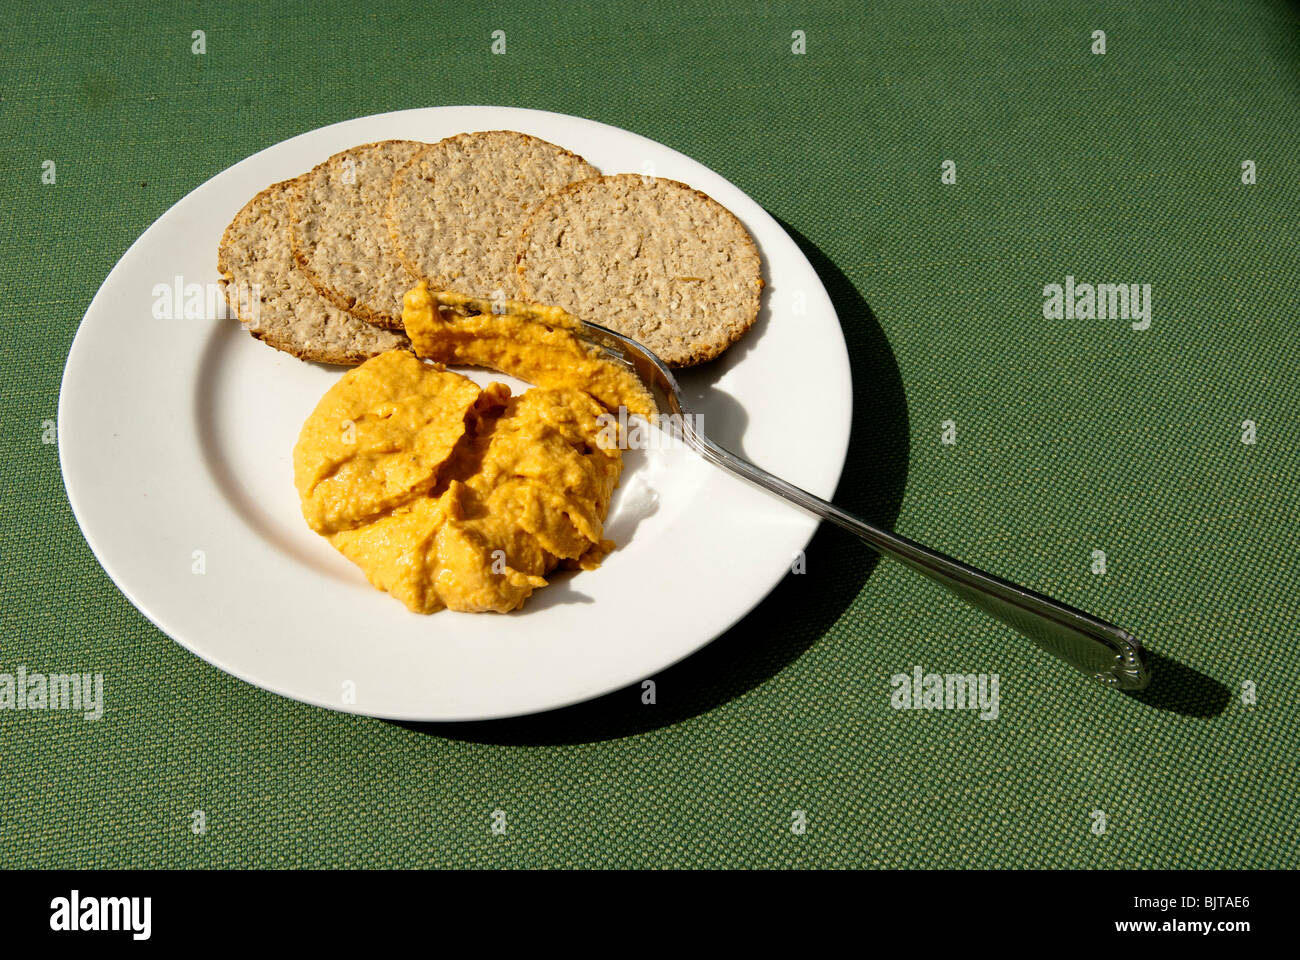 A plate of humus with oatmeal biscuits and fork. Stock Photo